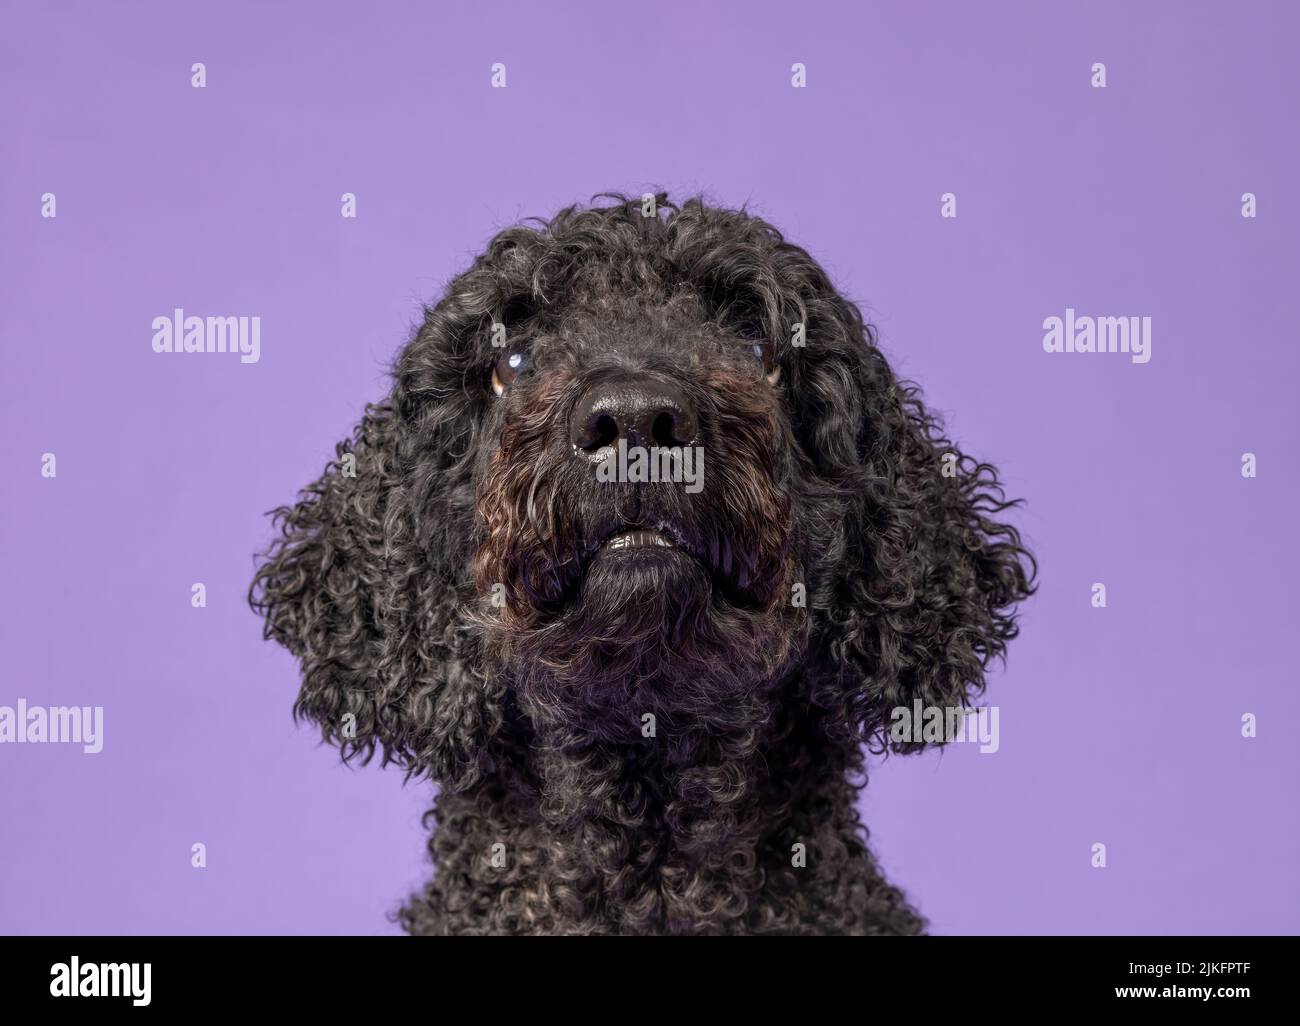 A beautiful black Labradoodle dog, photographed in a studio and looking towards the camera. Photographed against a plain purple background Stock Photo